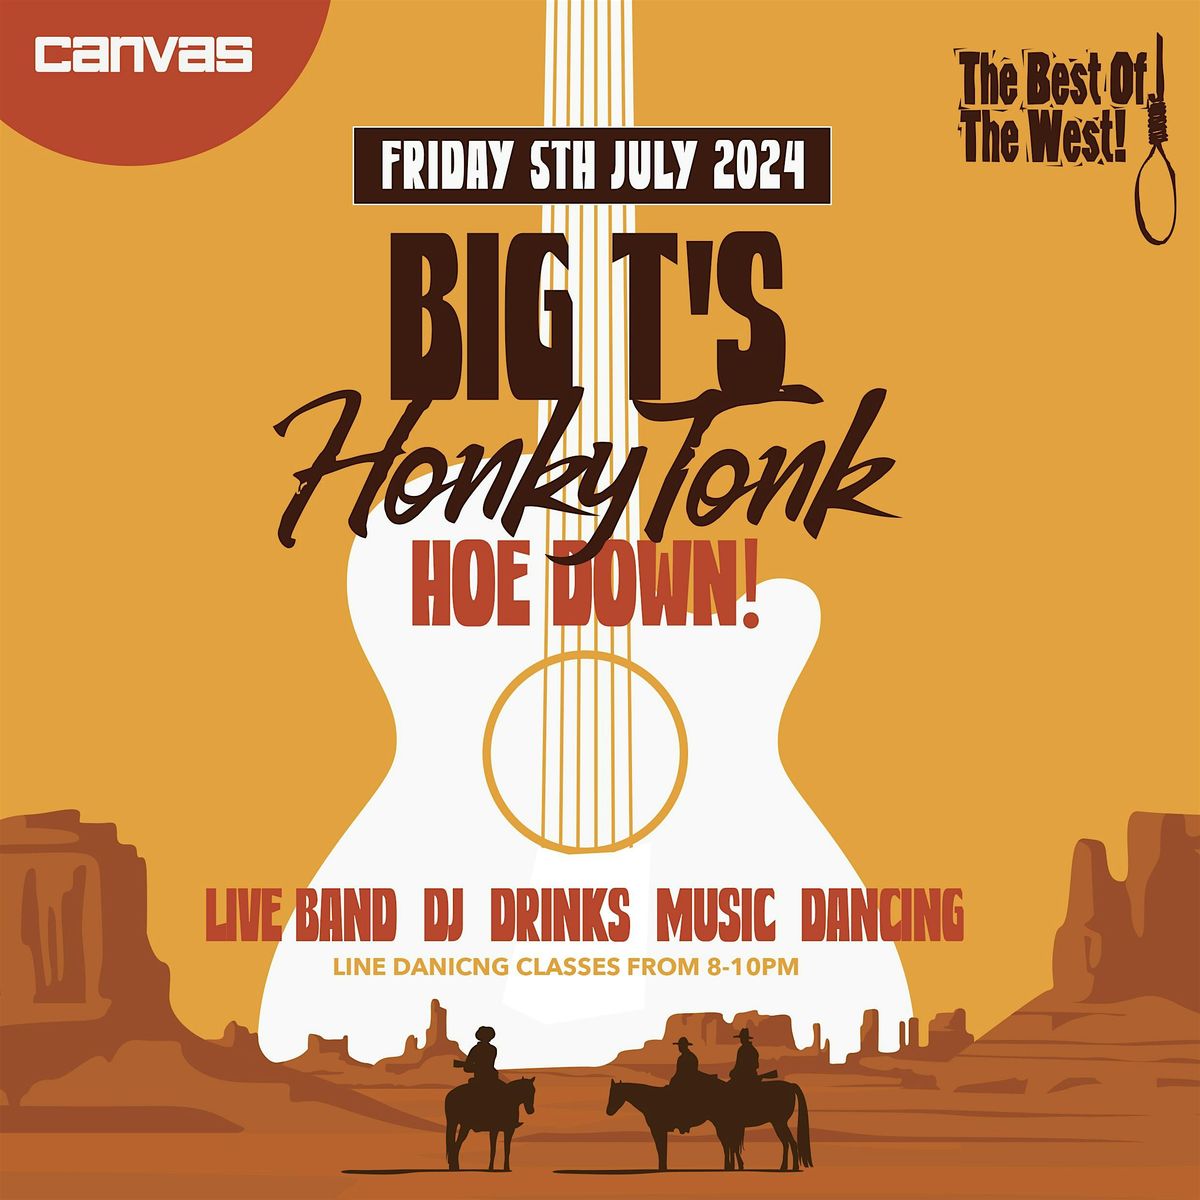 BIG T's Honky Tonk Hoe Down: Country Music Extravaganza